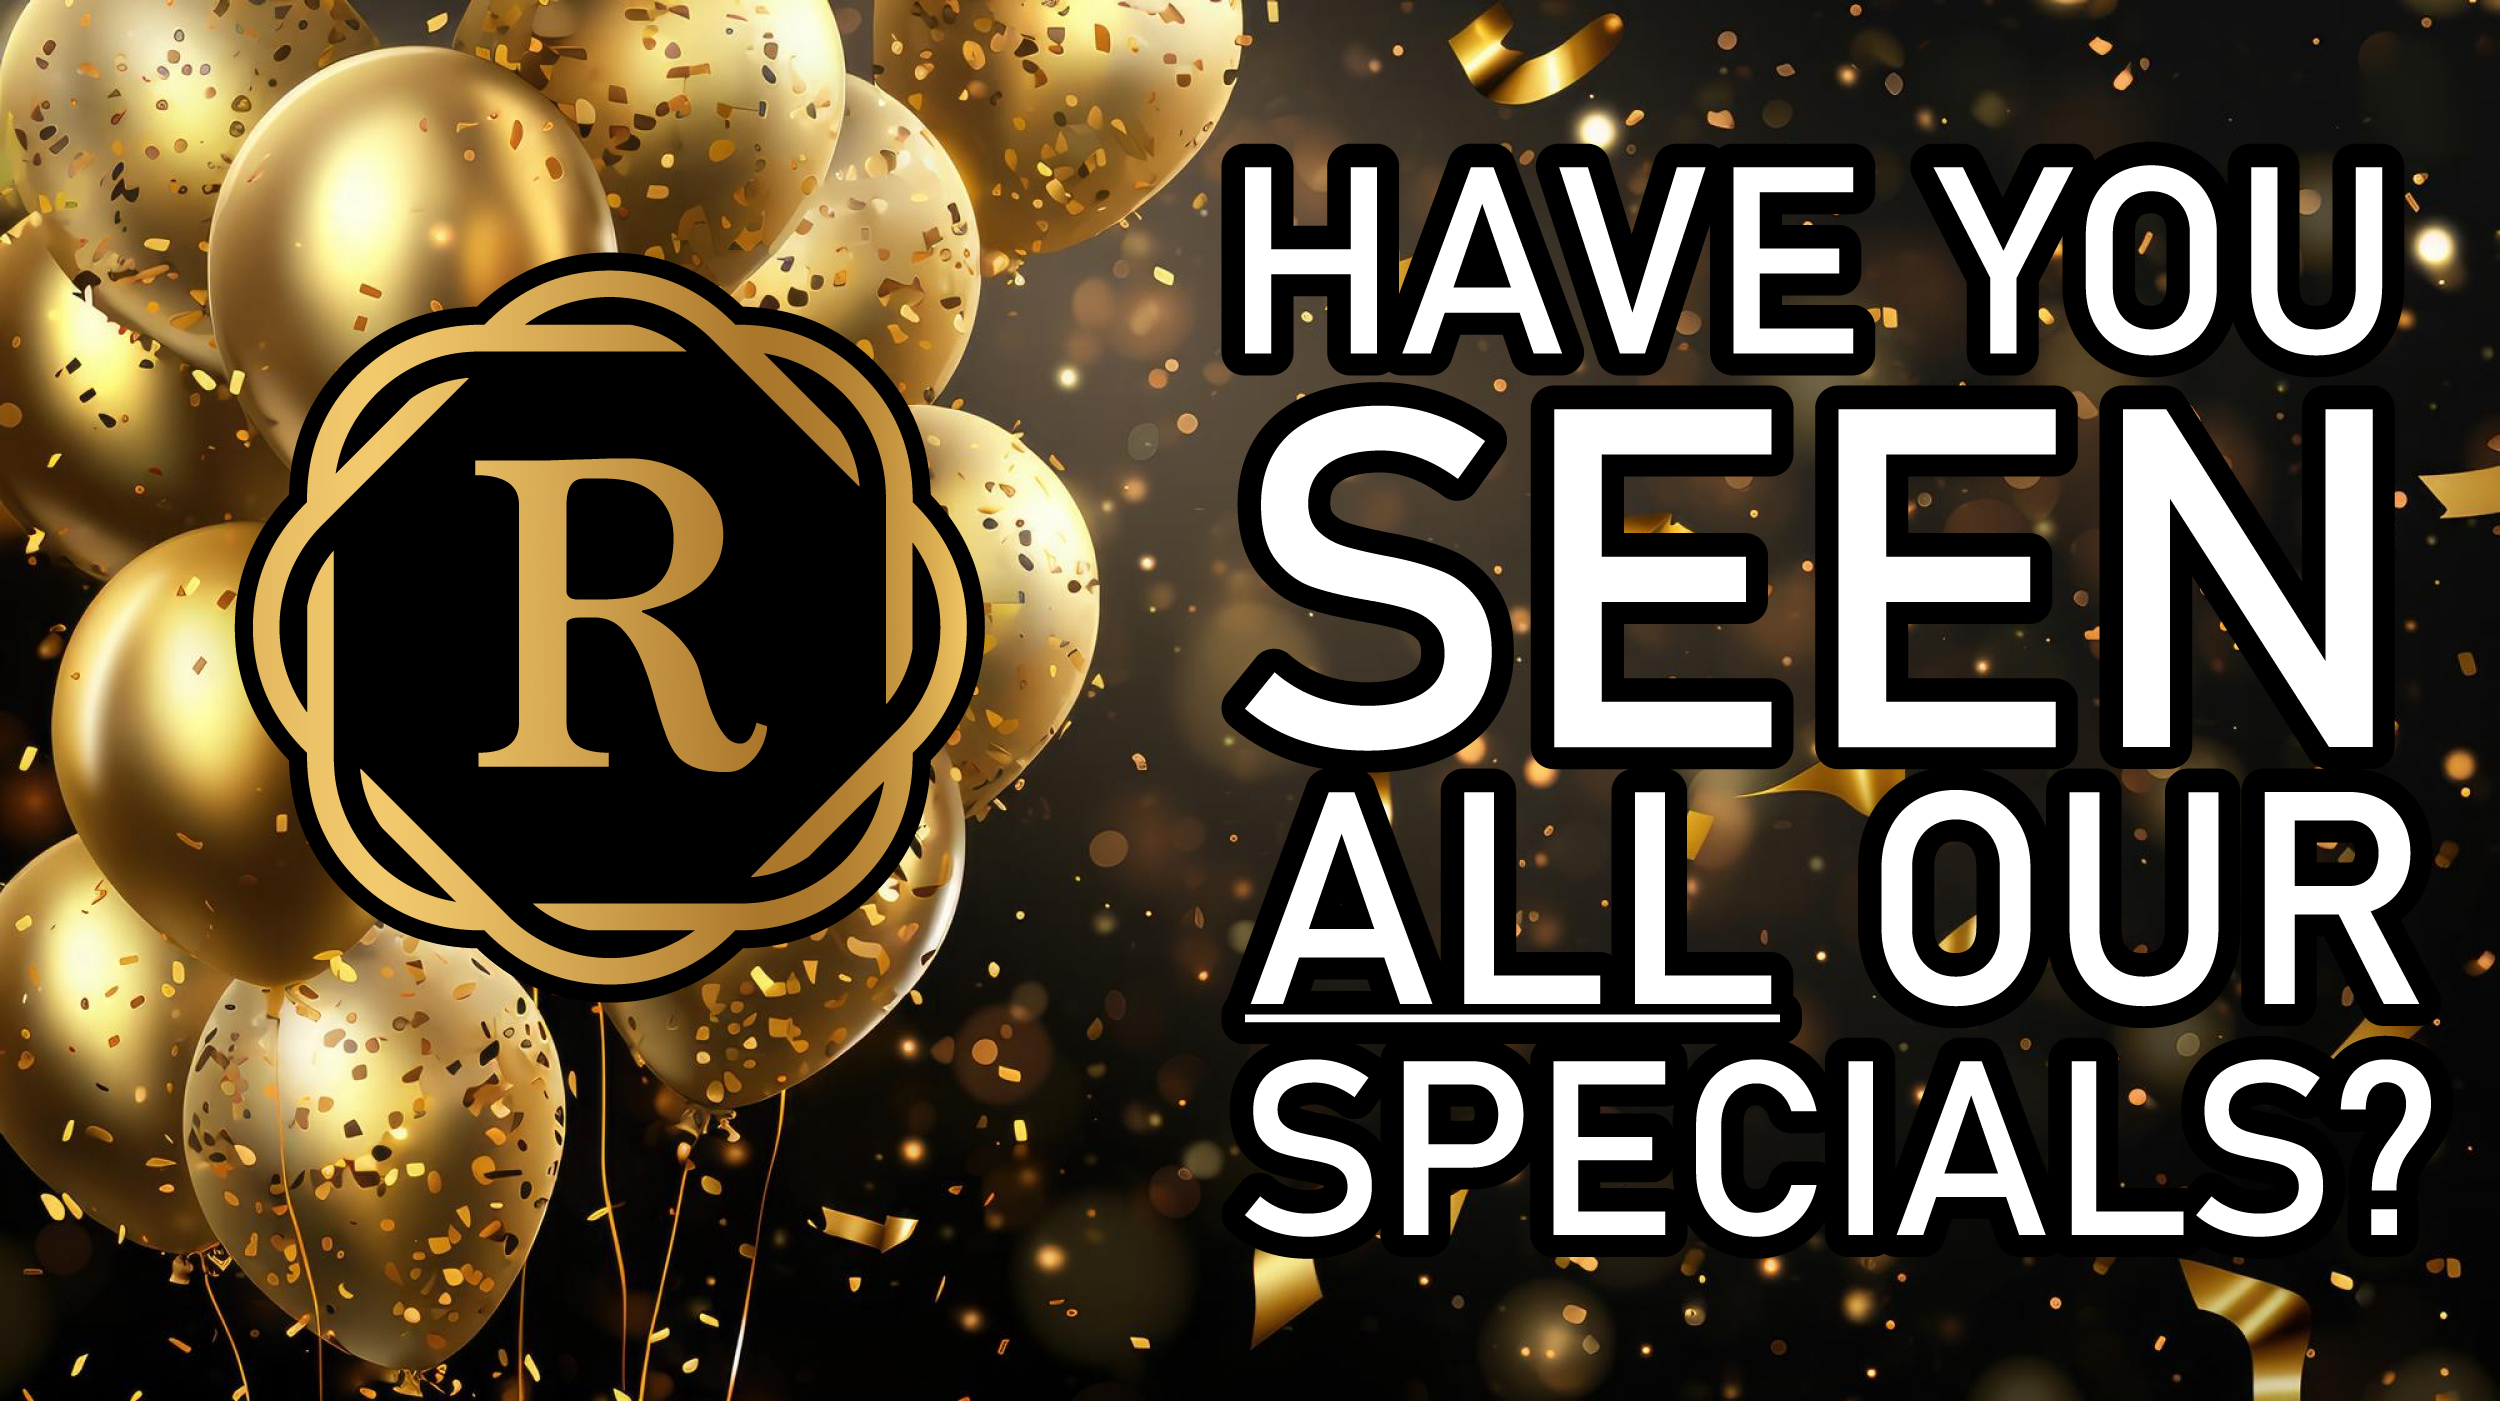 Have you seen ALL the specials we are running!?